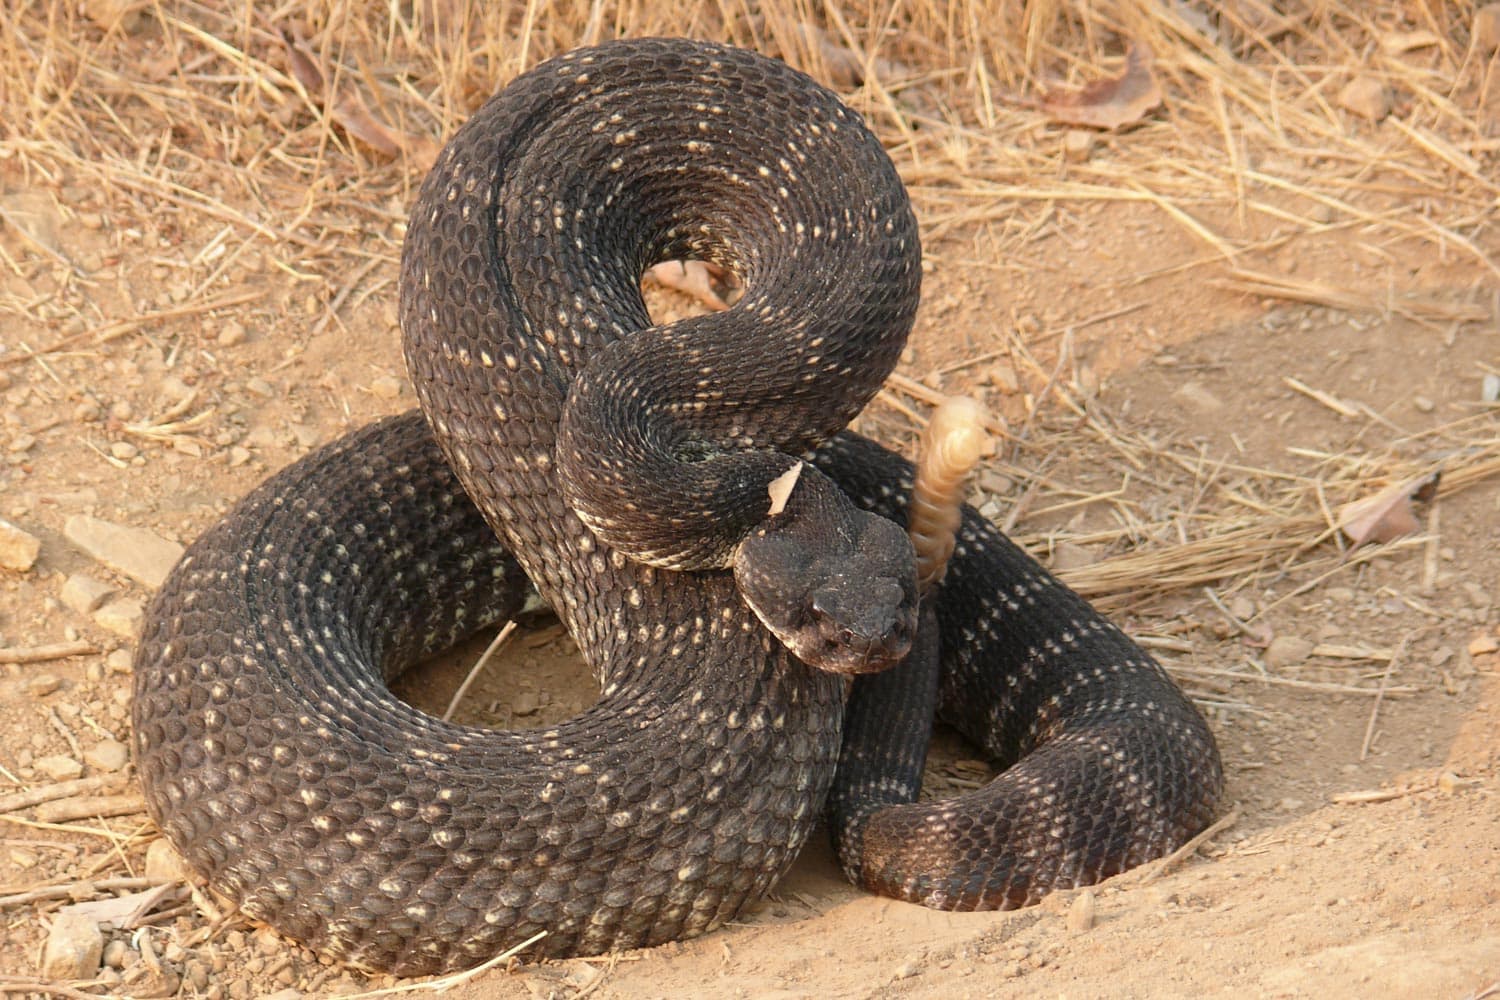 Southern Pacific rattlesnake in Santa Monica Mountains National Recreation Area - Image credit: NPS